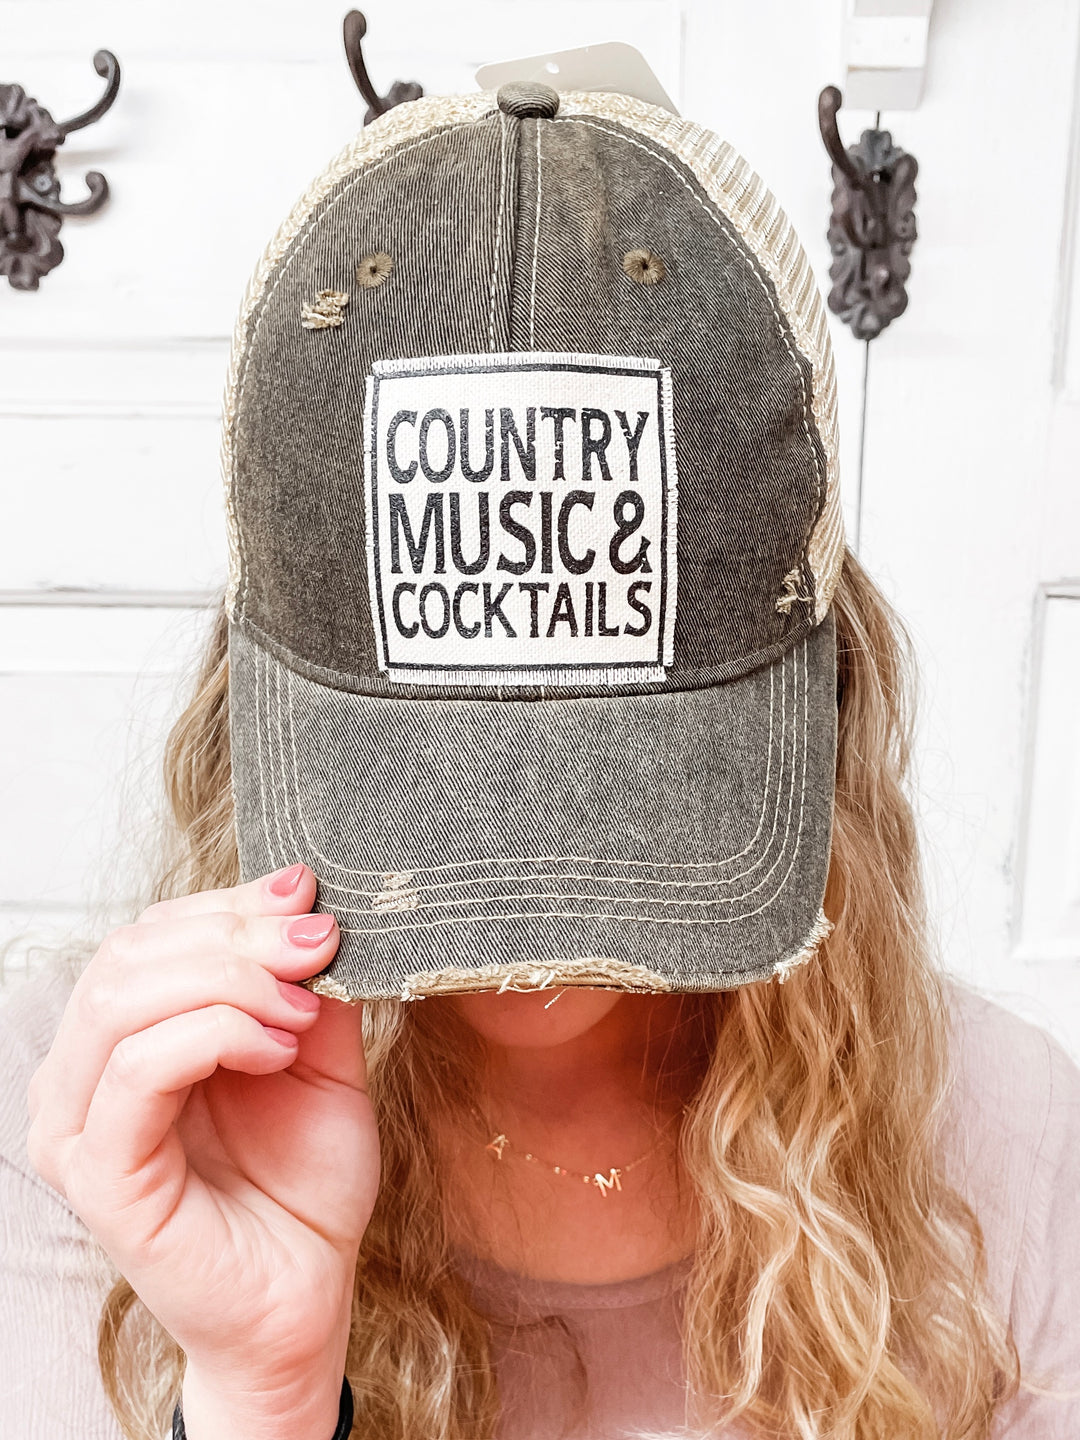 Country Music & Cocktails Hat